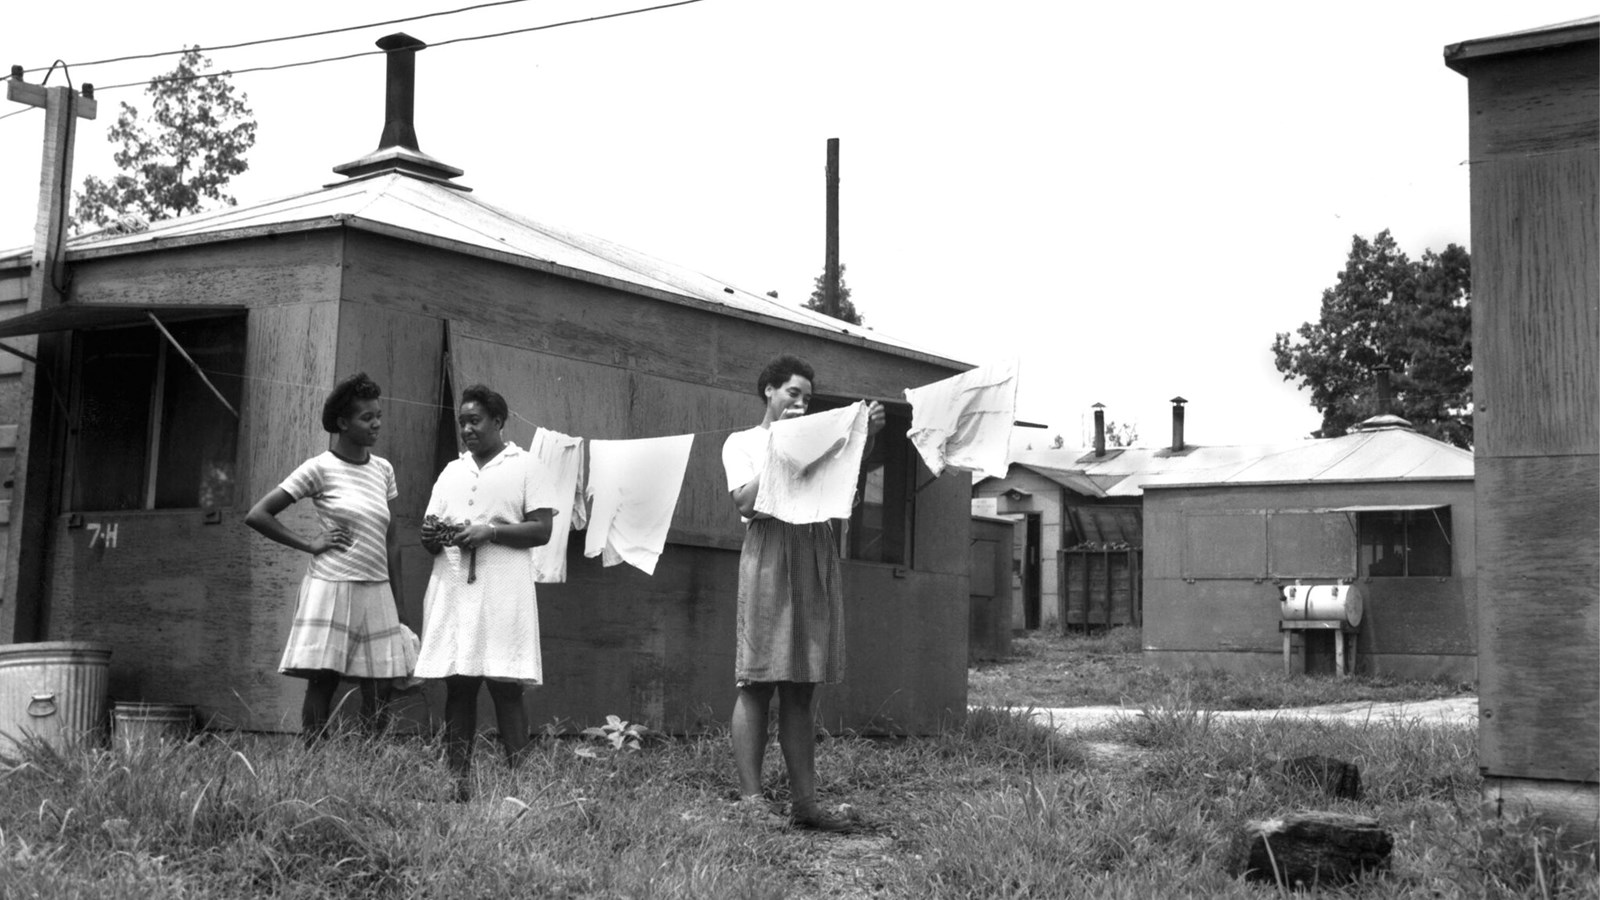 A black and white photo of 3 Black women with clothes on a clothesline between 2 small wooden shacks